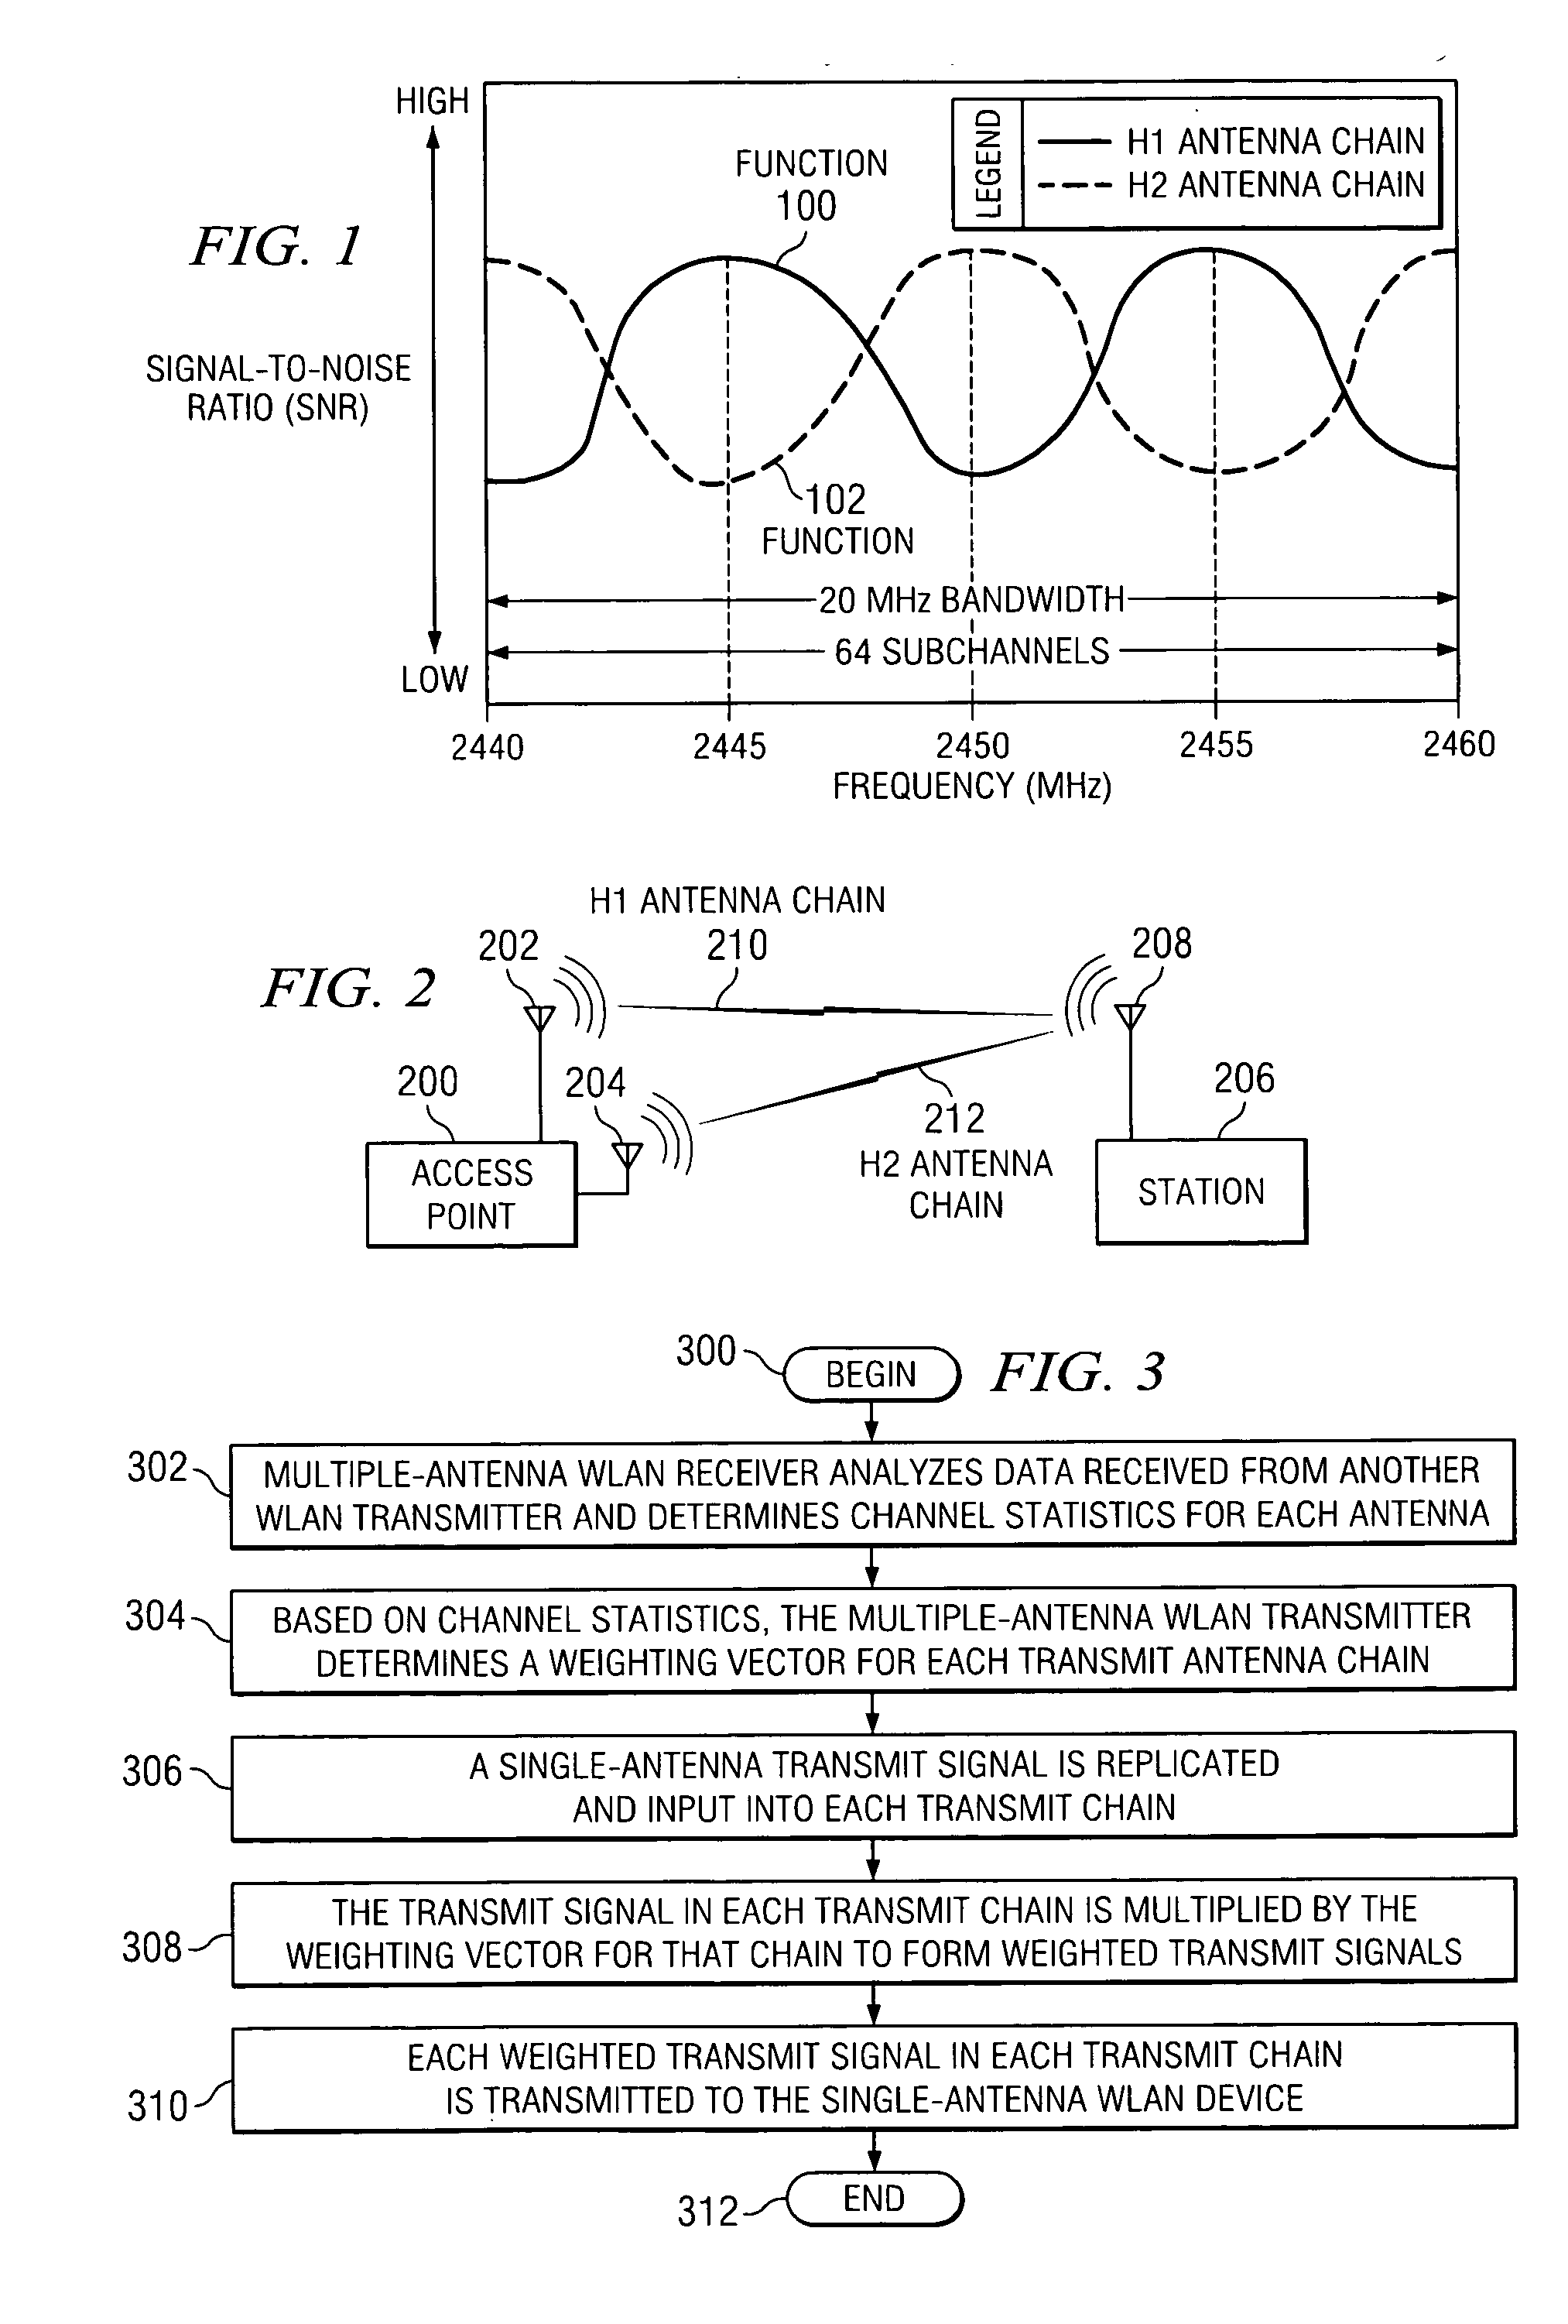 Frequency-domain subchannel transmit antenna selection and power pouring for multi-antenna transmission